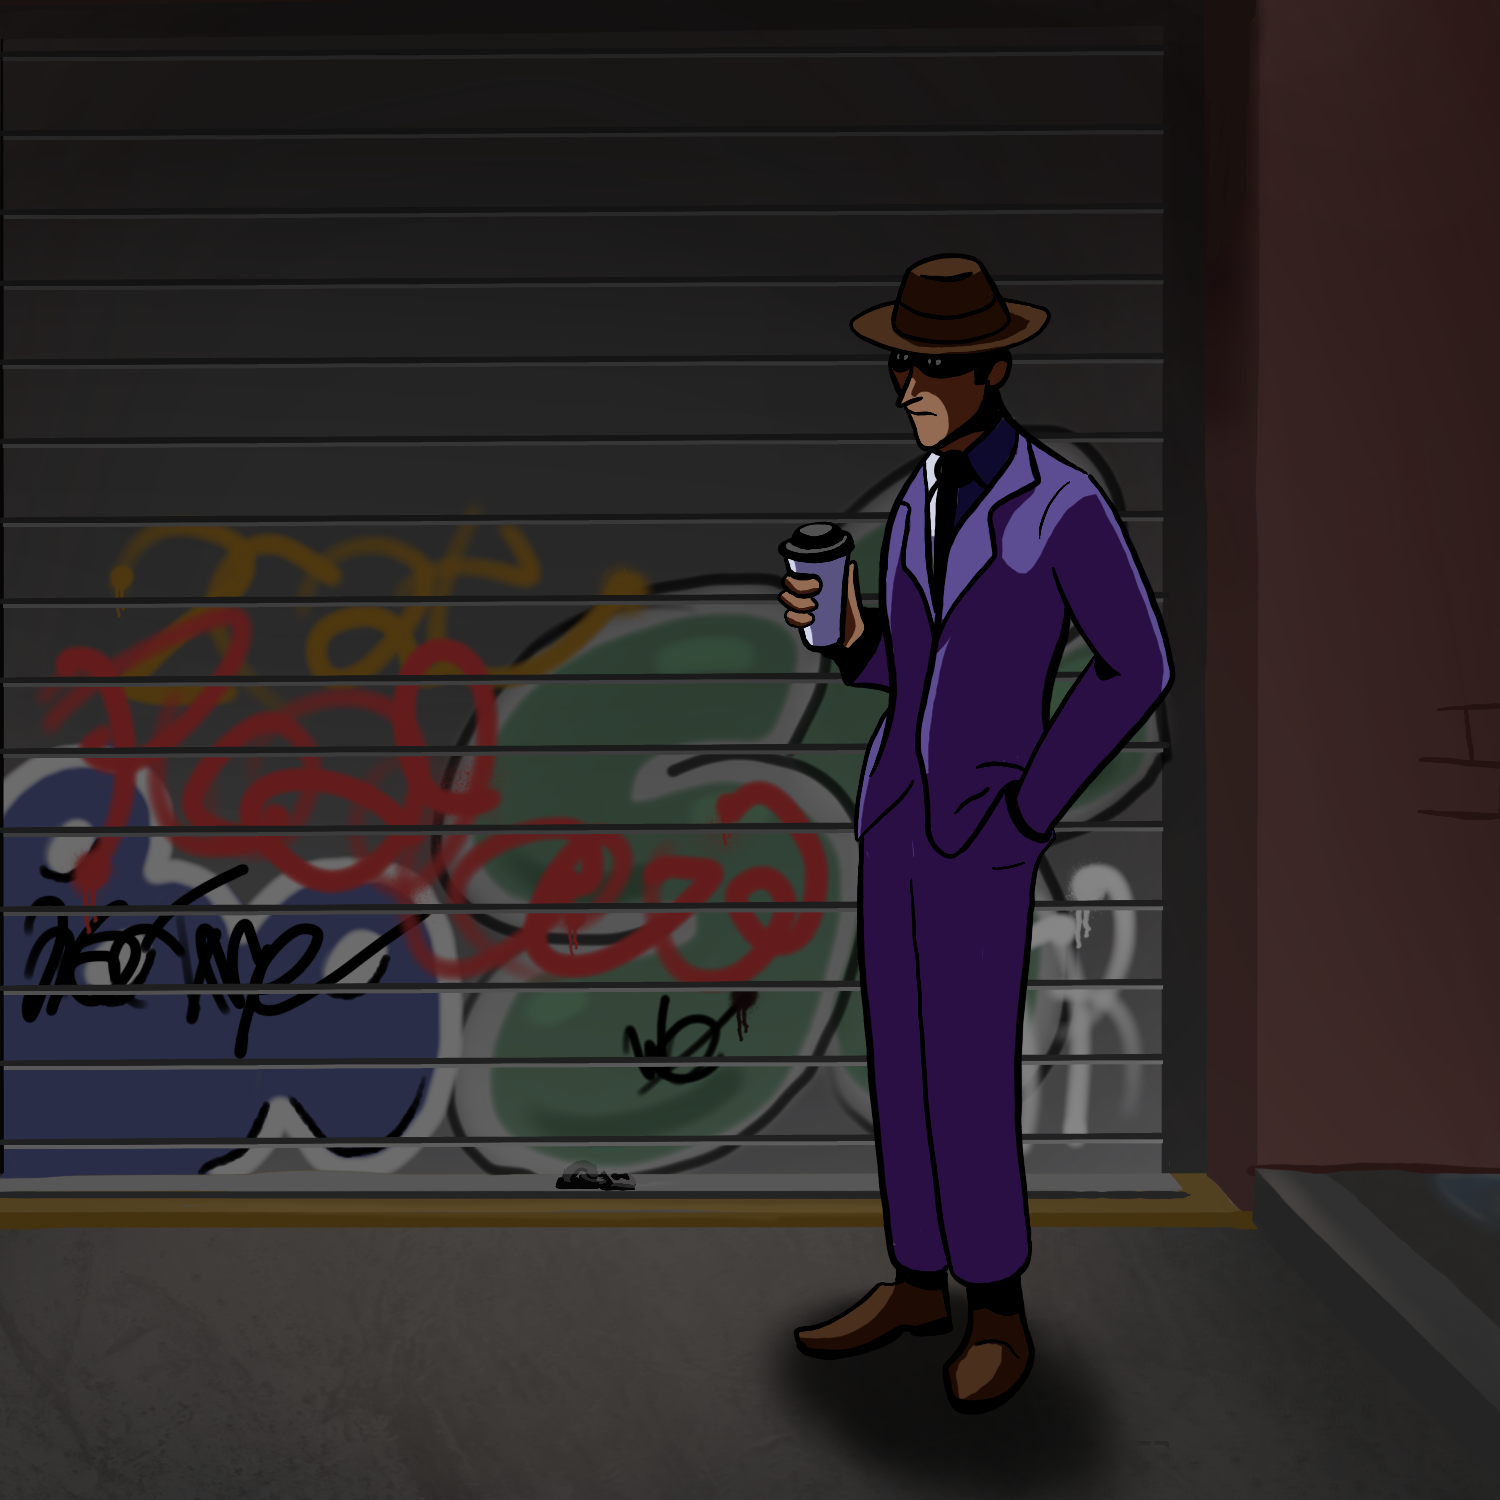 Illustration of a sinister looking character in a dodgy back alley